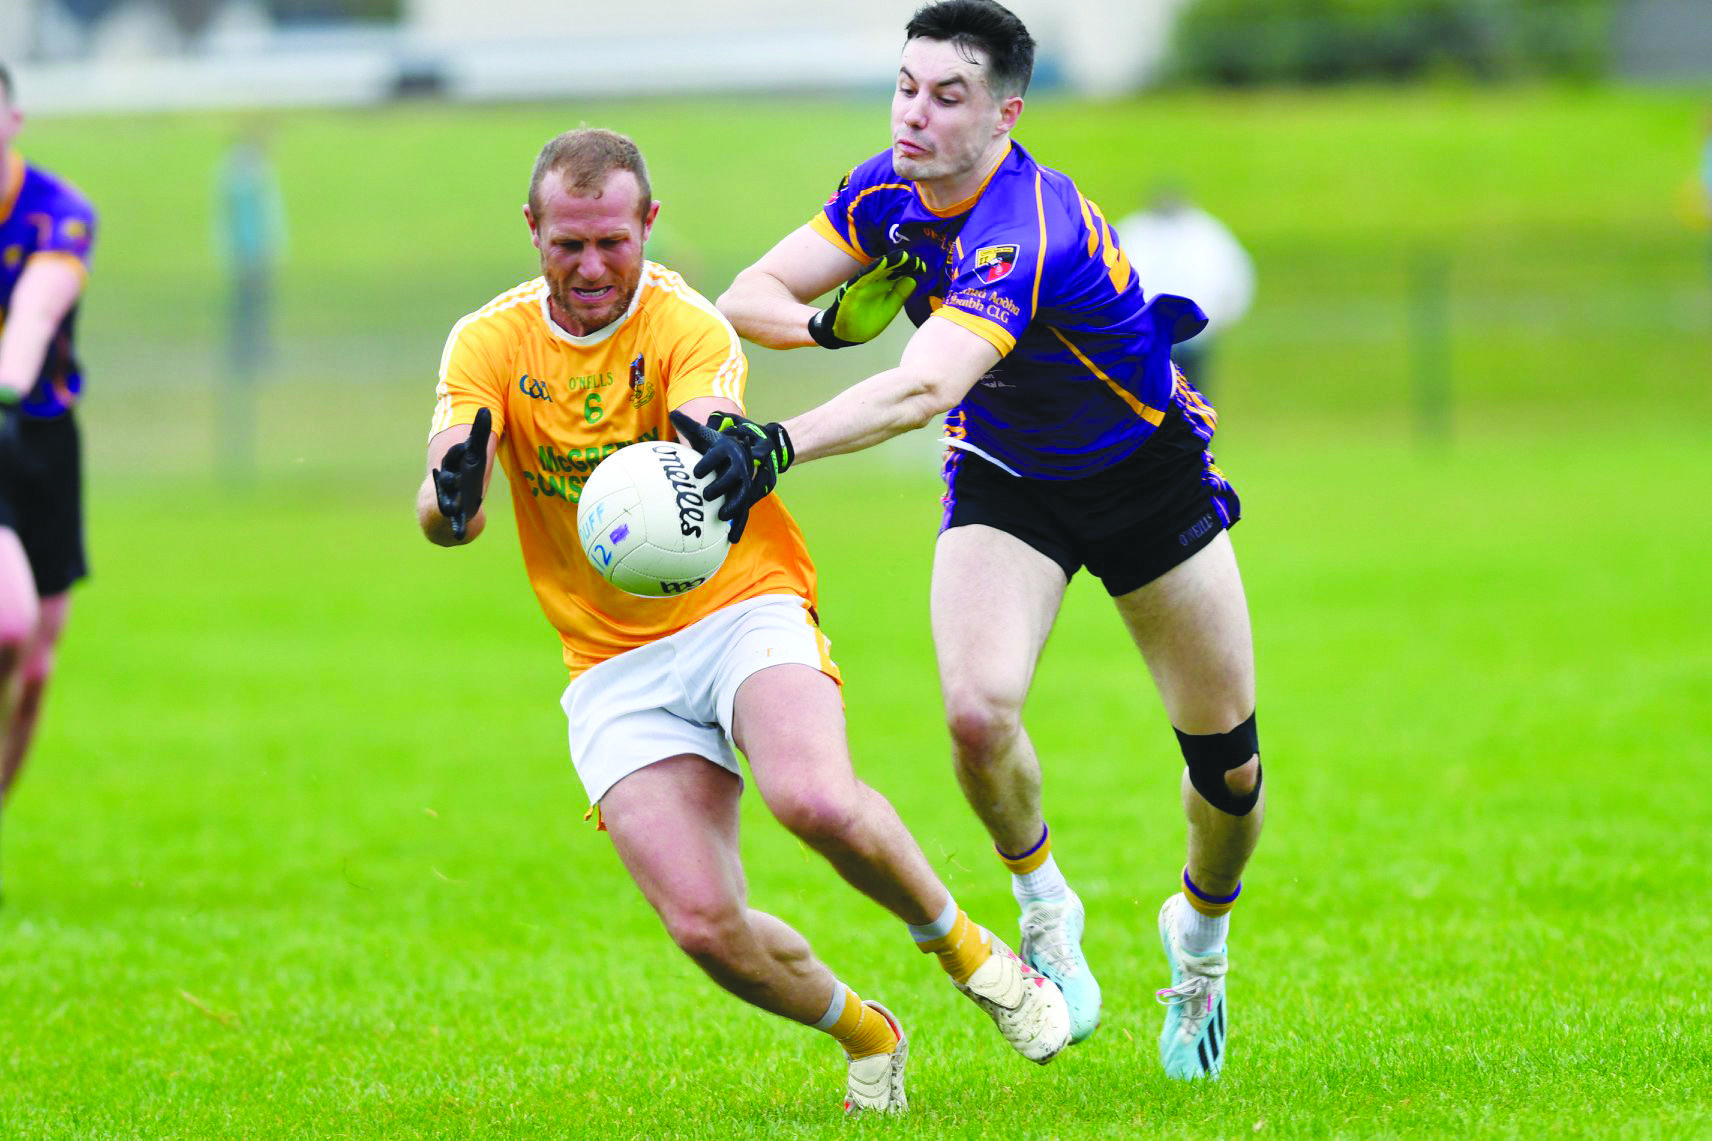 Barry O\'Hagan (Clonduff) and James Guinness (Carryduff) in action during last year\'s Down SFC quarter-final at Newcastle. The sides meet again on Monday evening in Newry